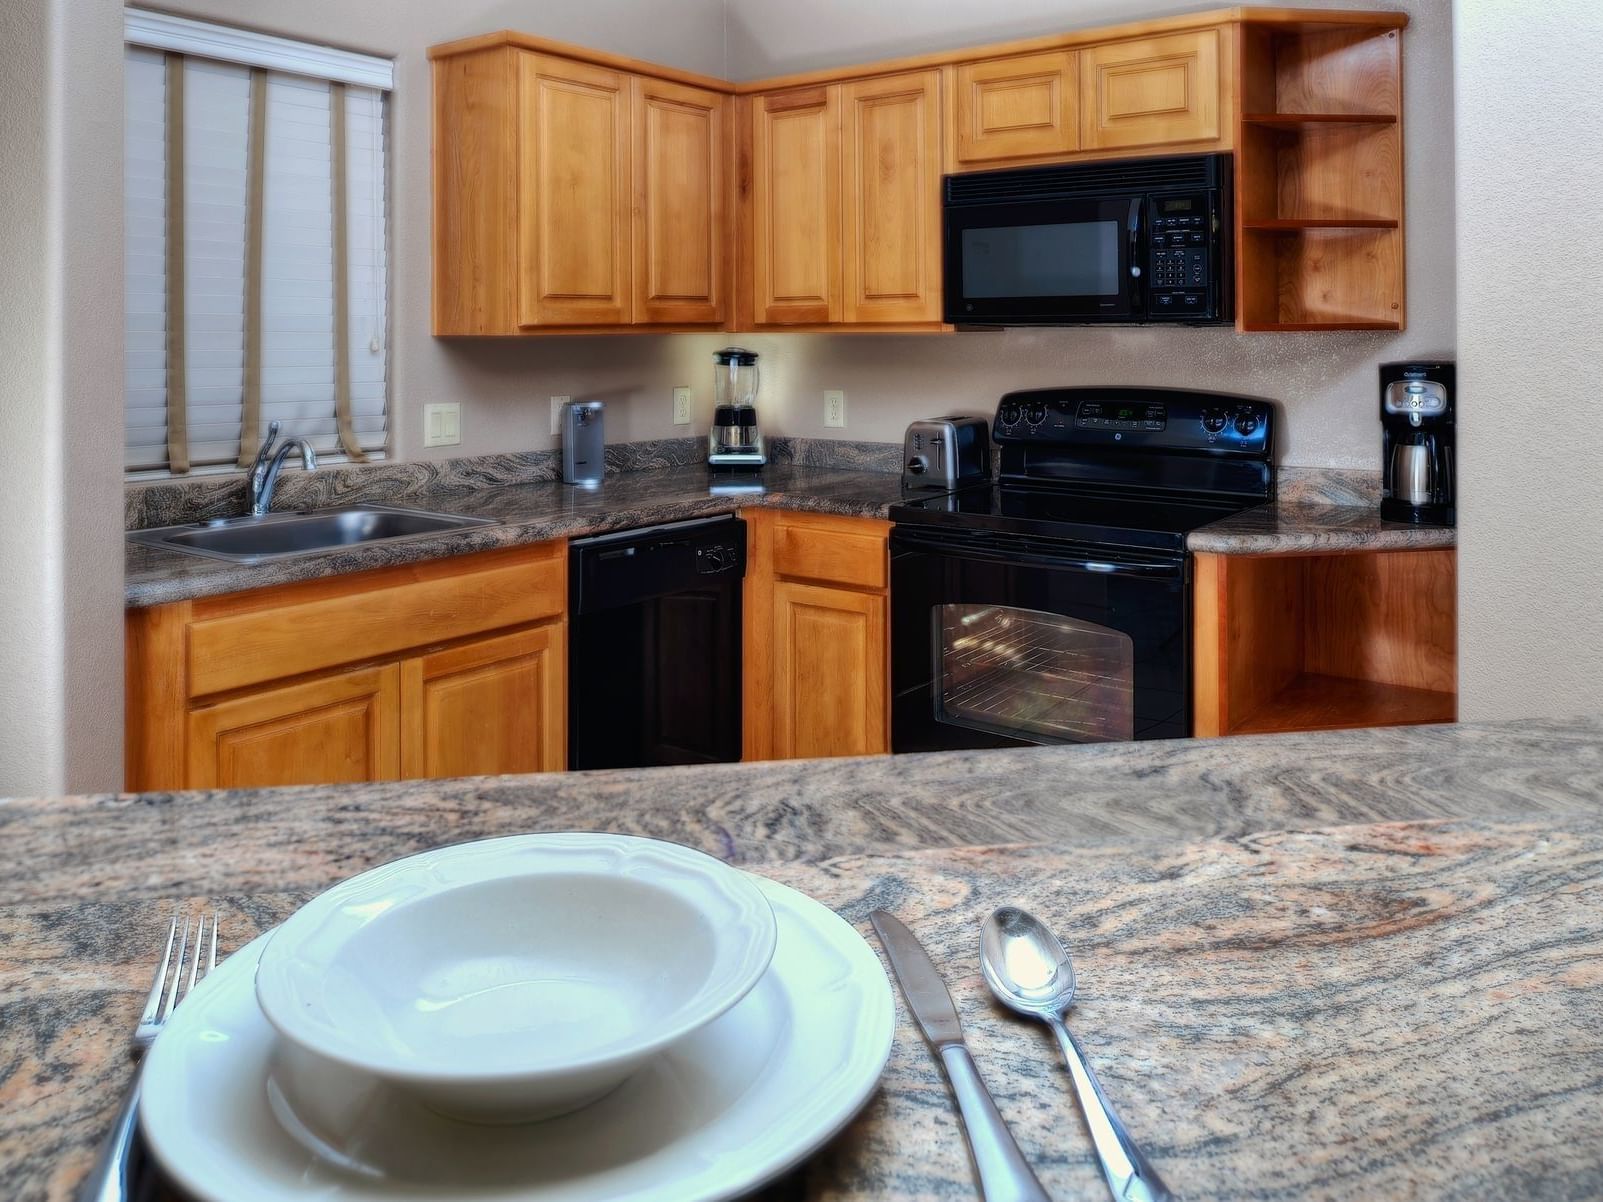 Kitchen area and necessary kitchen utensils of One Bedroom Suite at Diamond Sedona Portal Hotel